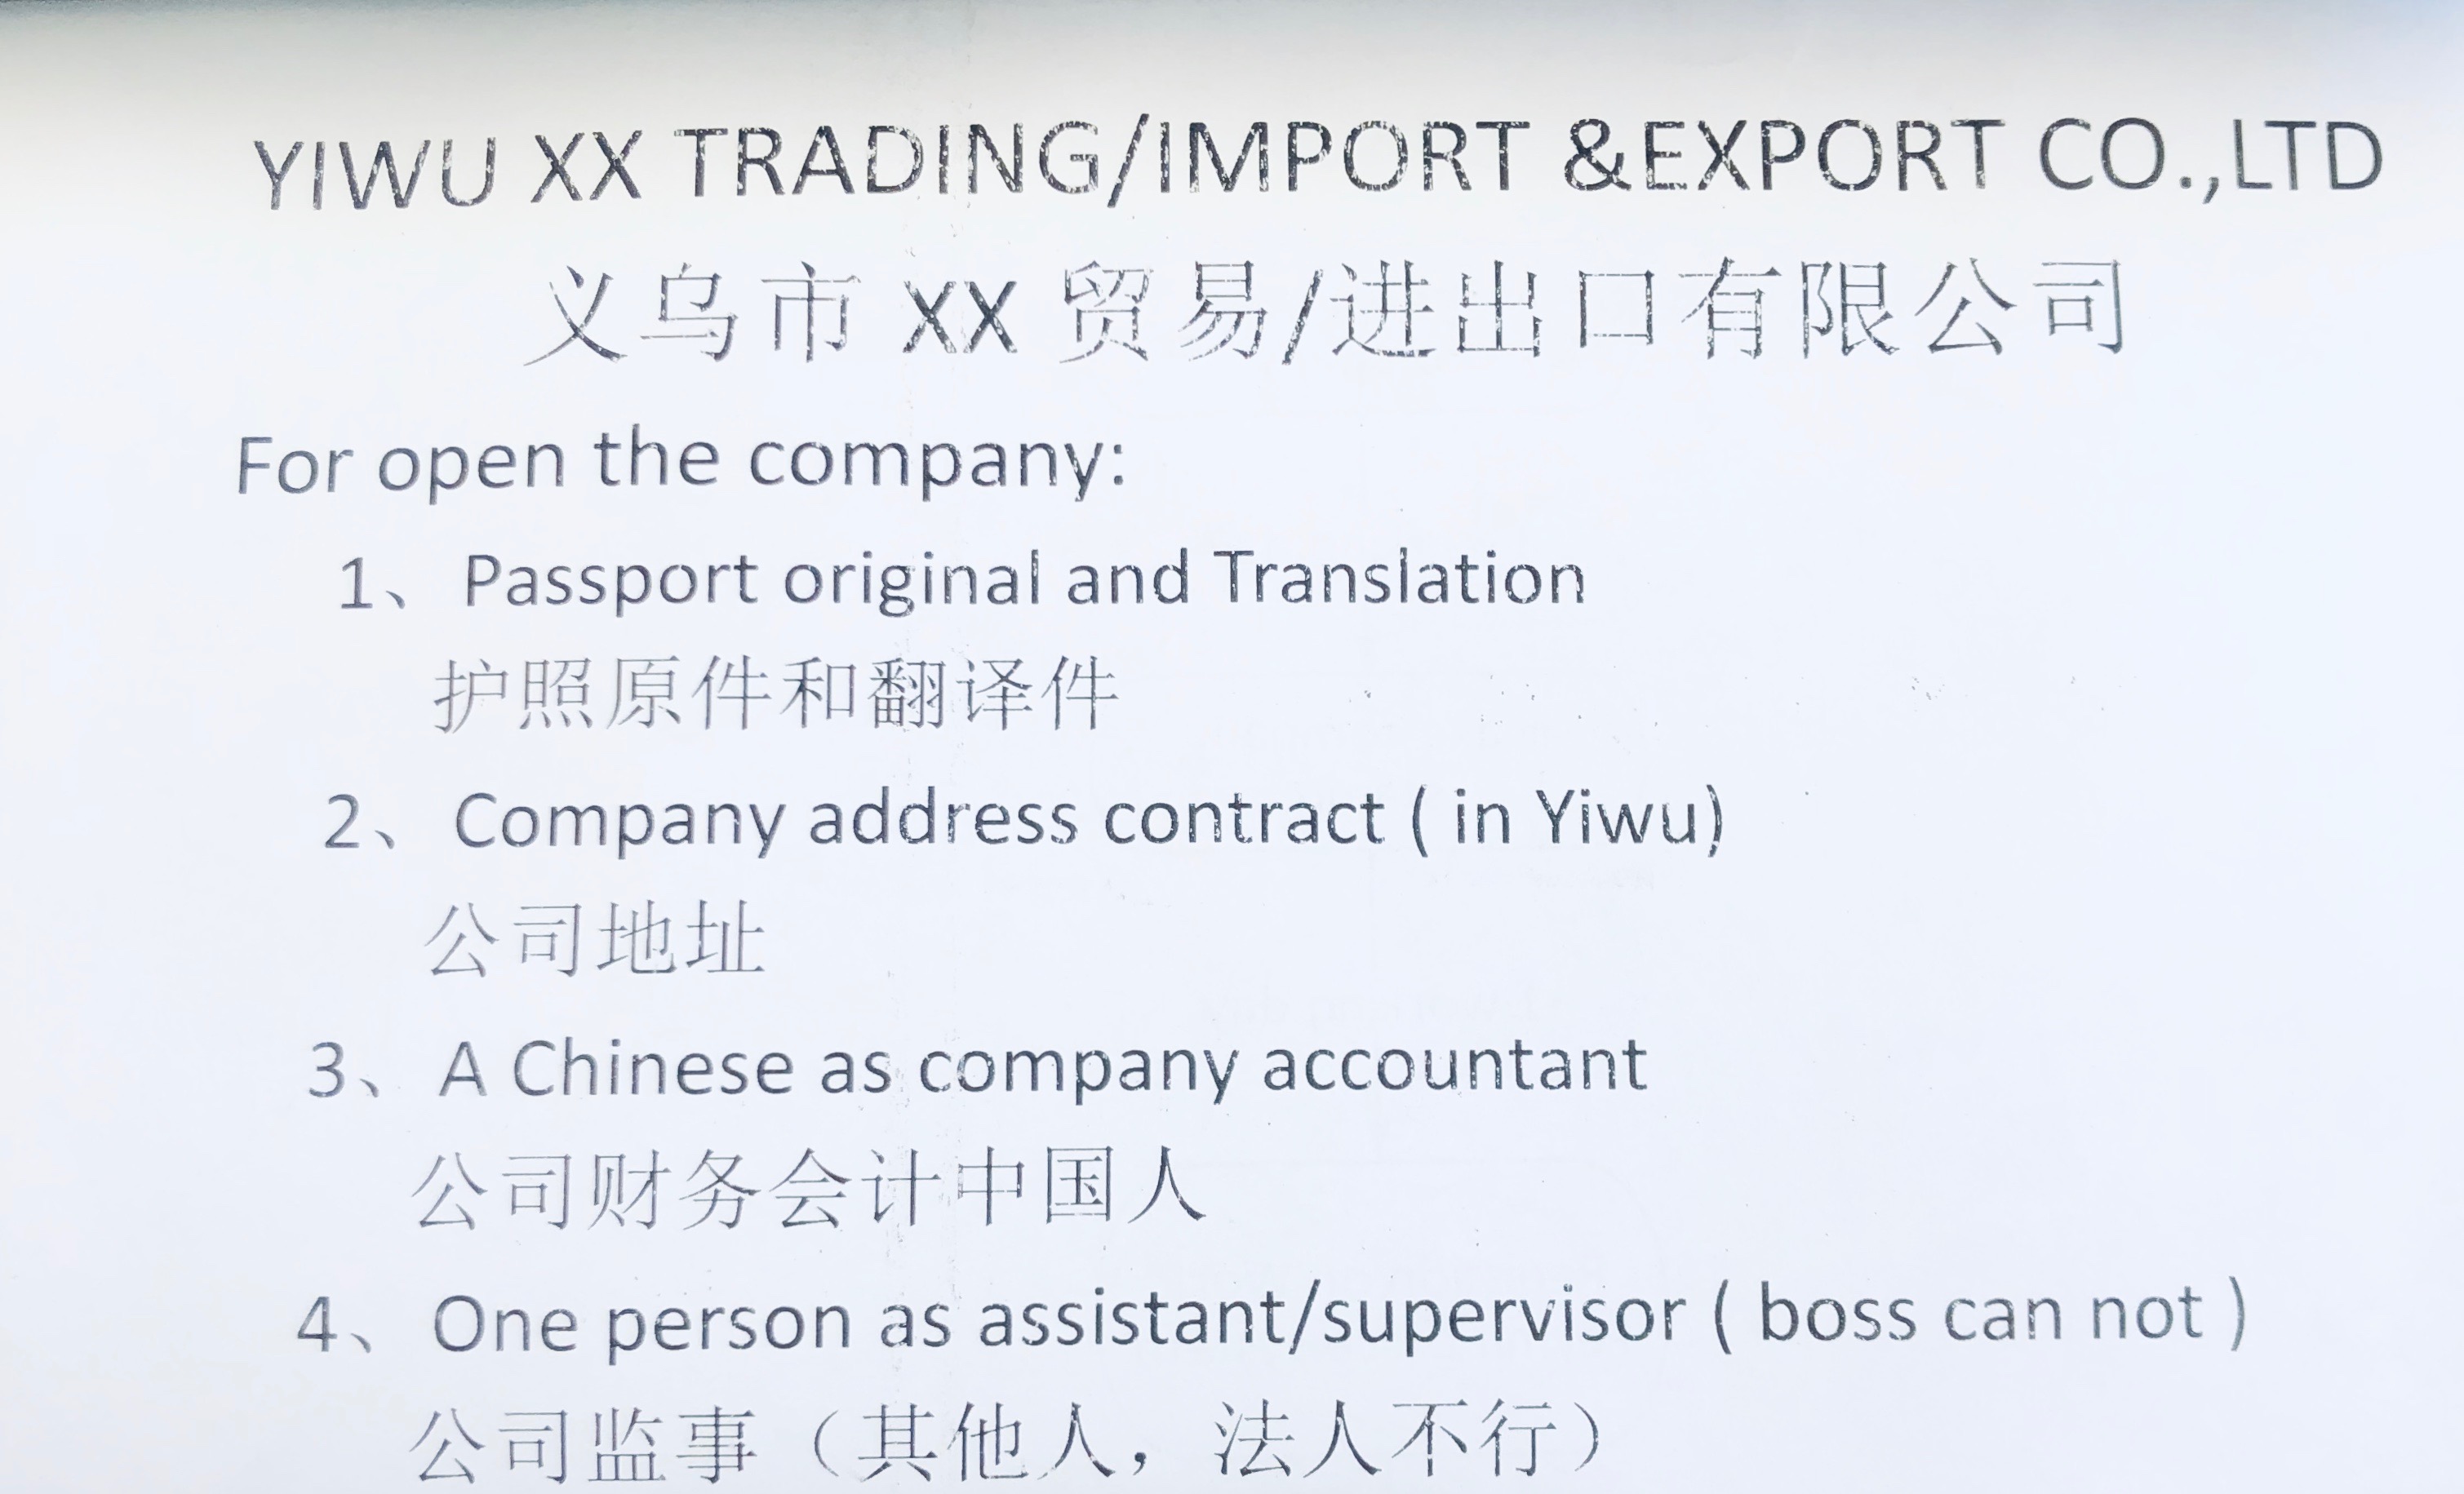 docs (documents) / material required for open (register ) company in Yiwu China